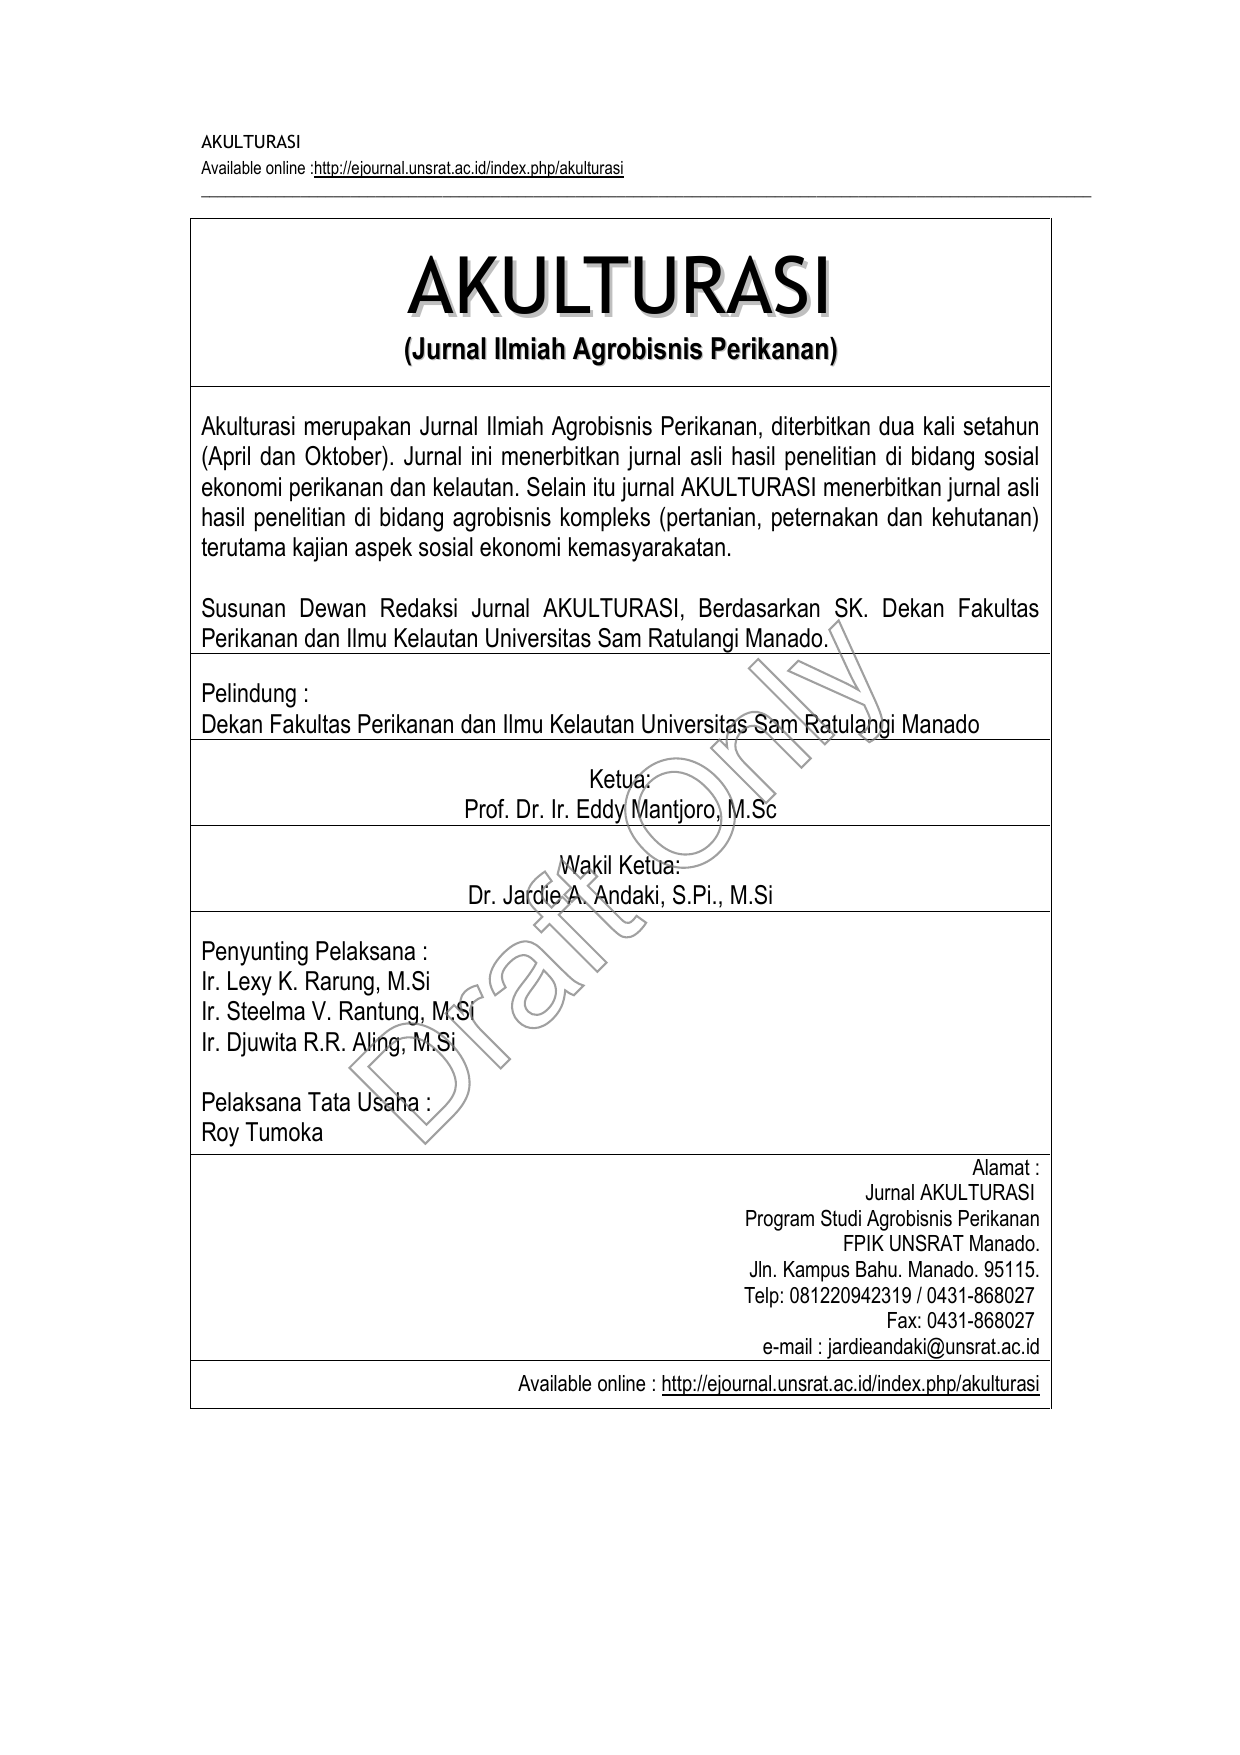 AKULTURASI Available online